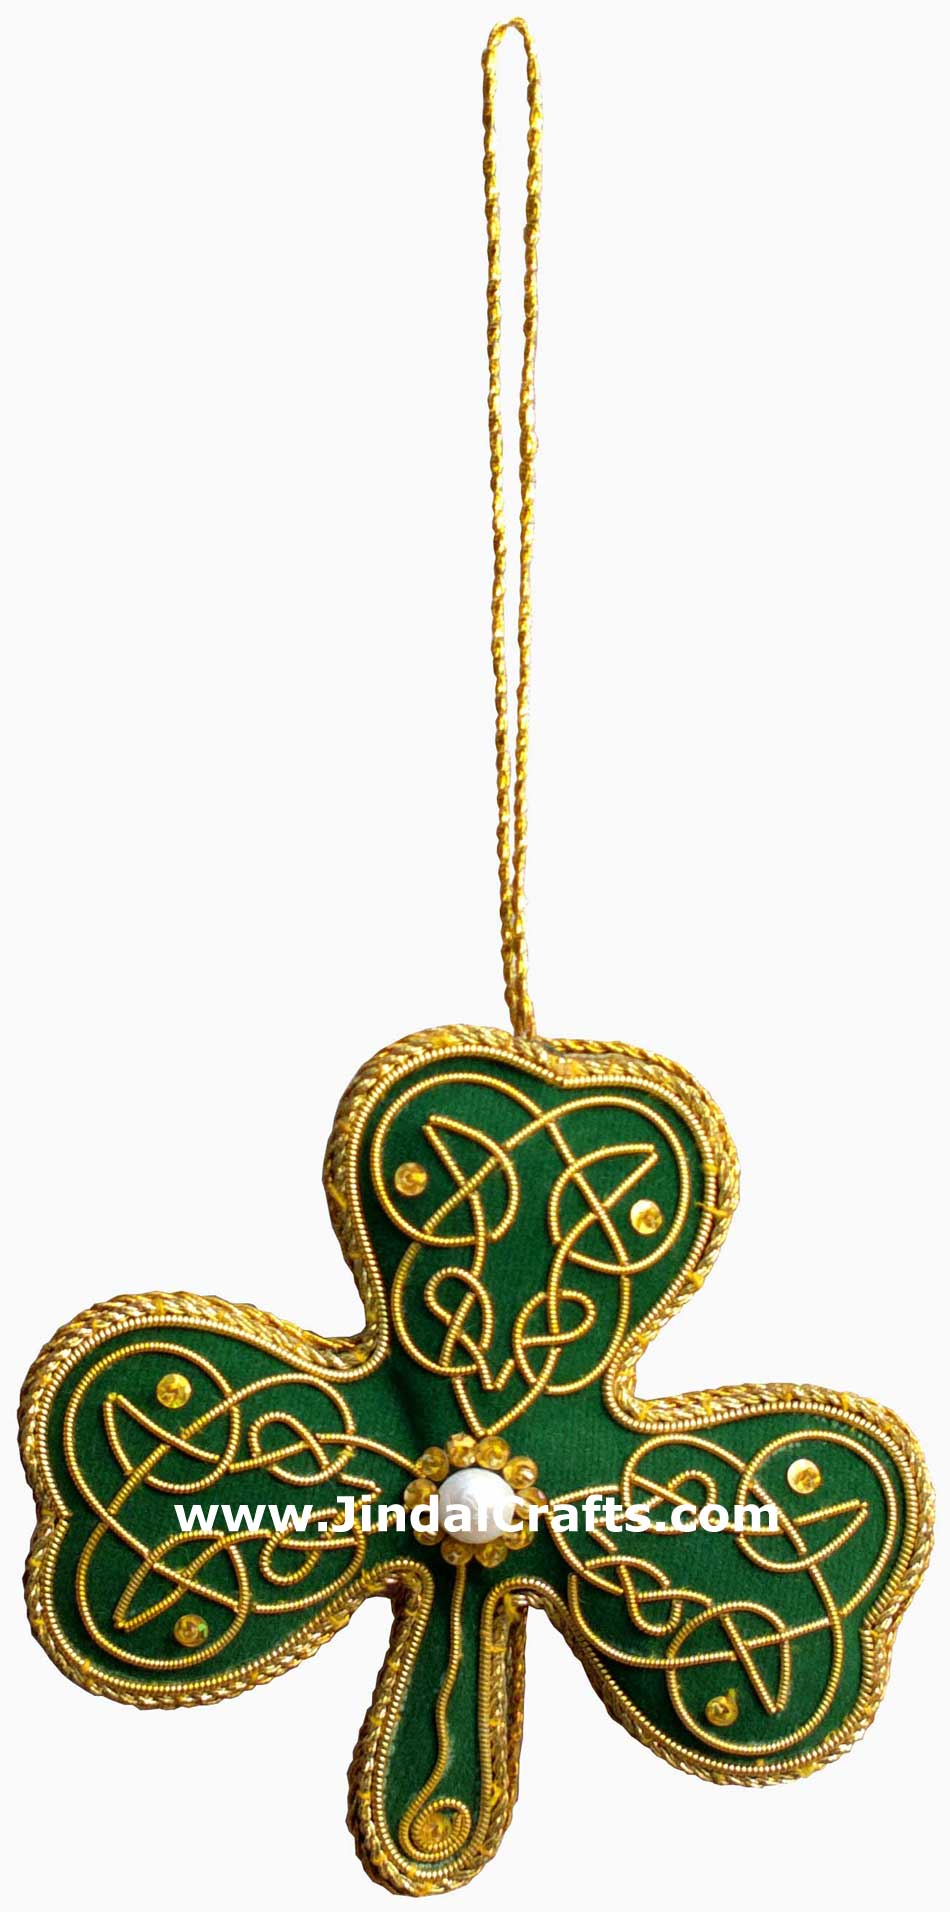 Irish Themed Hand Made Embroidered Christmas Ornaments Xmas Holiday Decorations